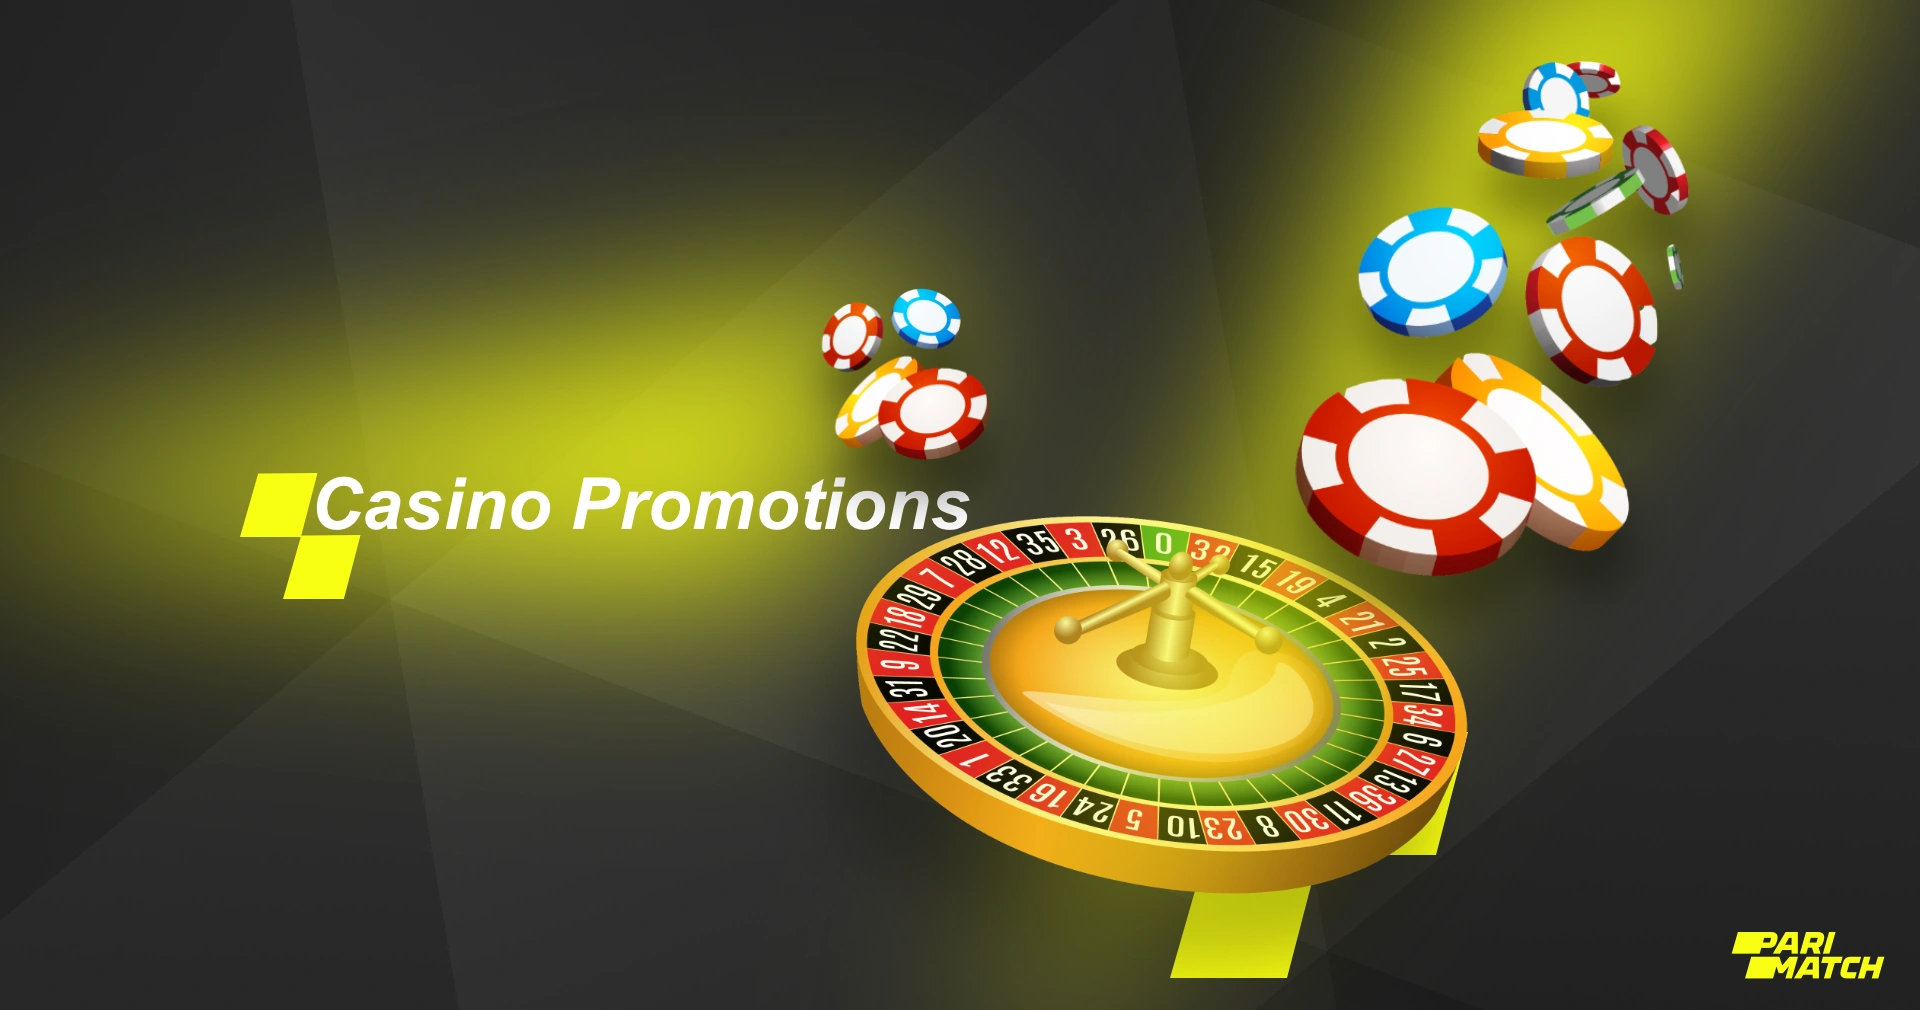 Learn what promotions and bonuses you can get at Parimatch Casino